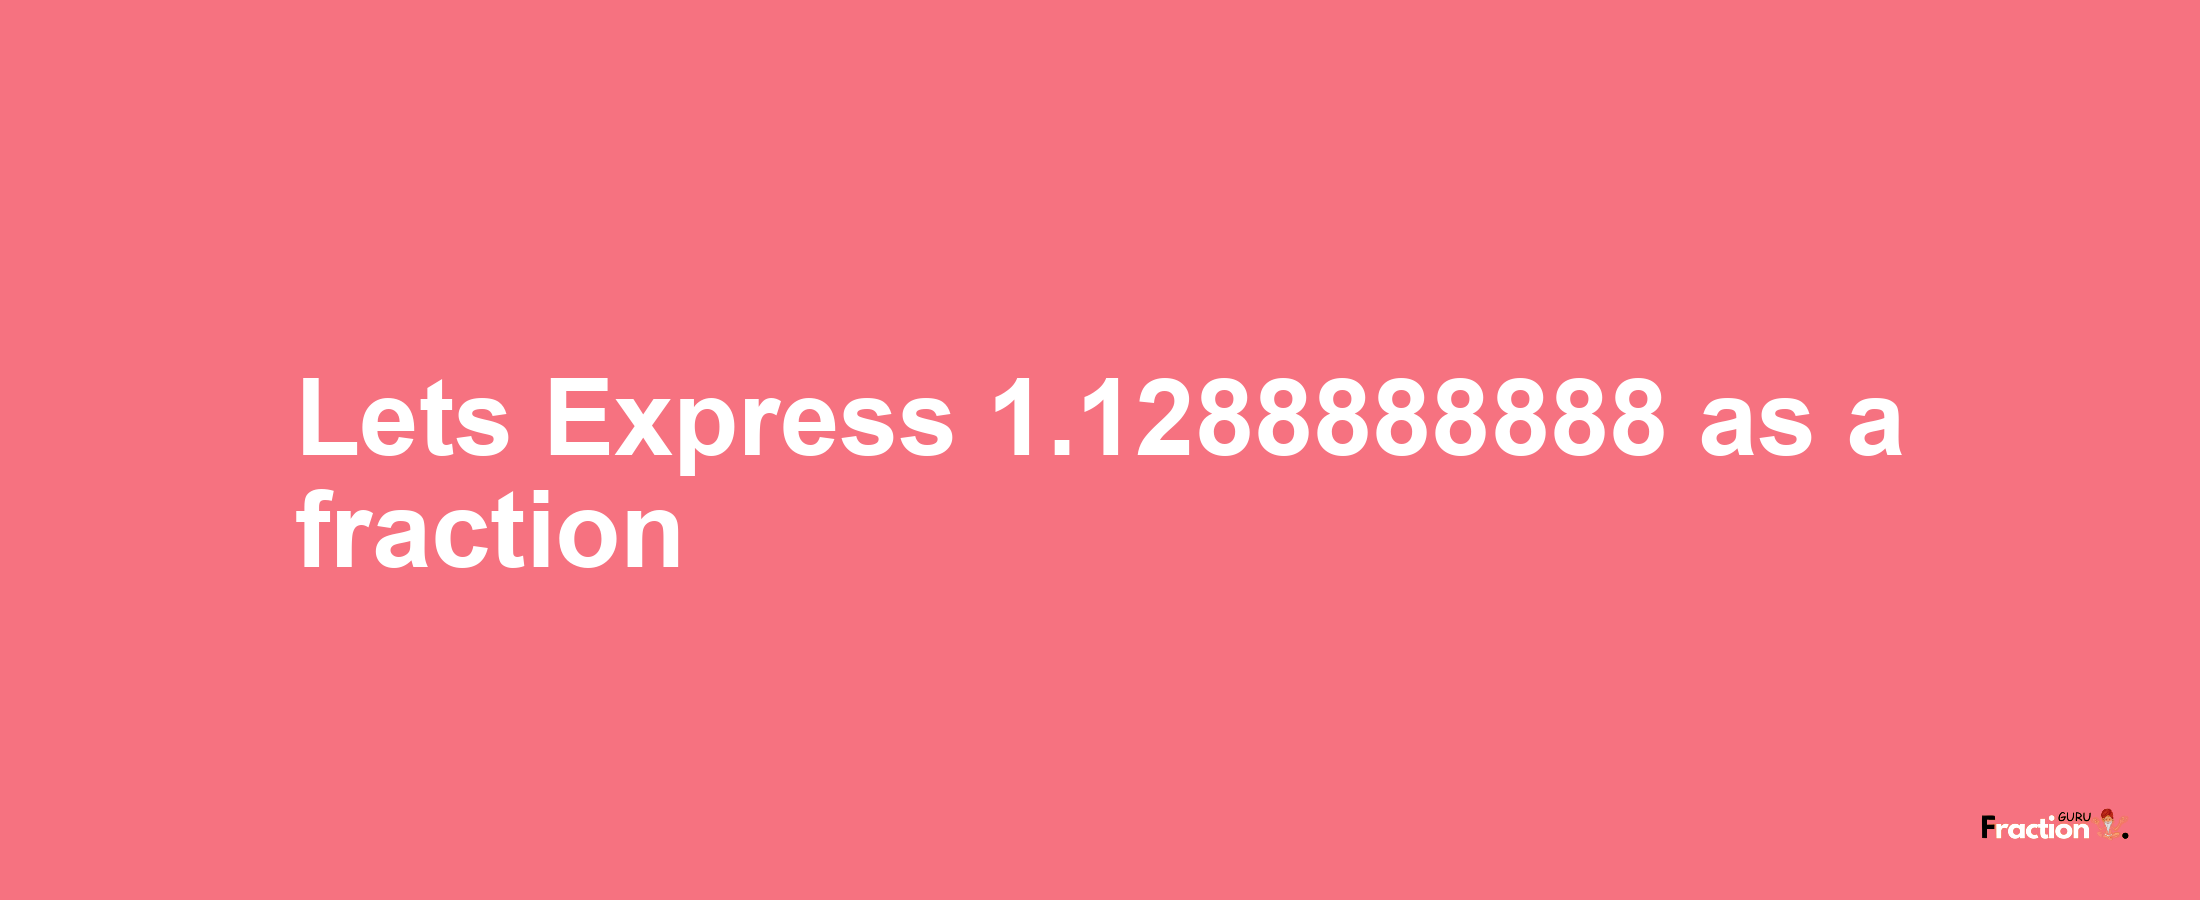 Lets Express 1.1288888888 as afraction